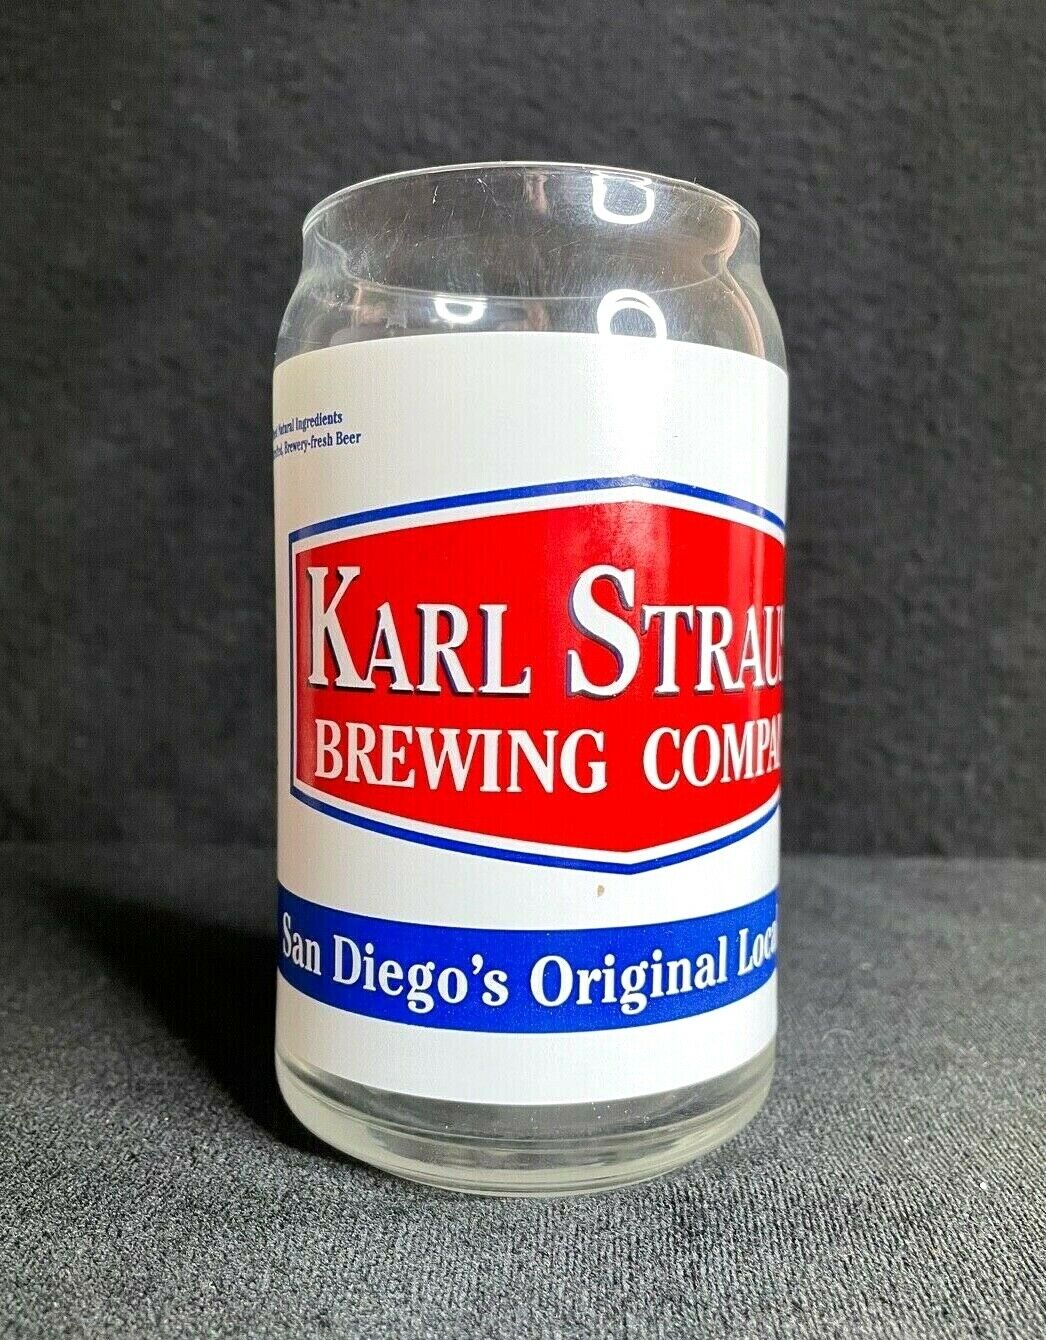 Karl Strauss Brewing Company Glass/ Tumbler - San Diego's Original Local Beer